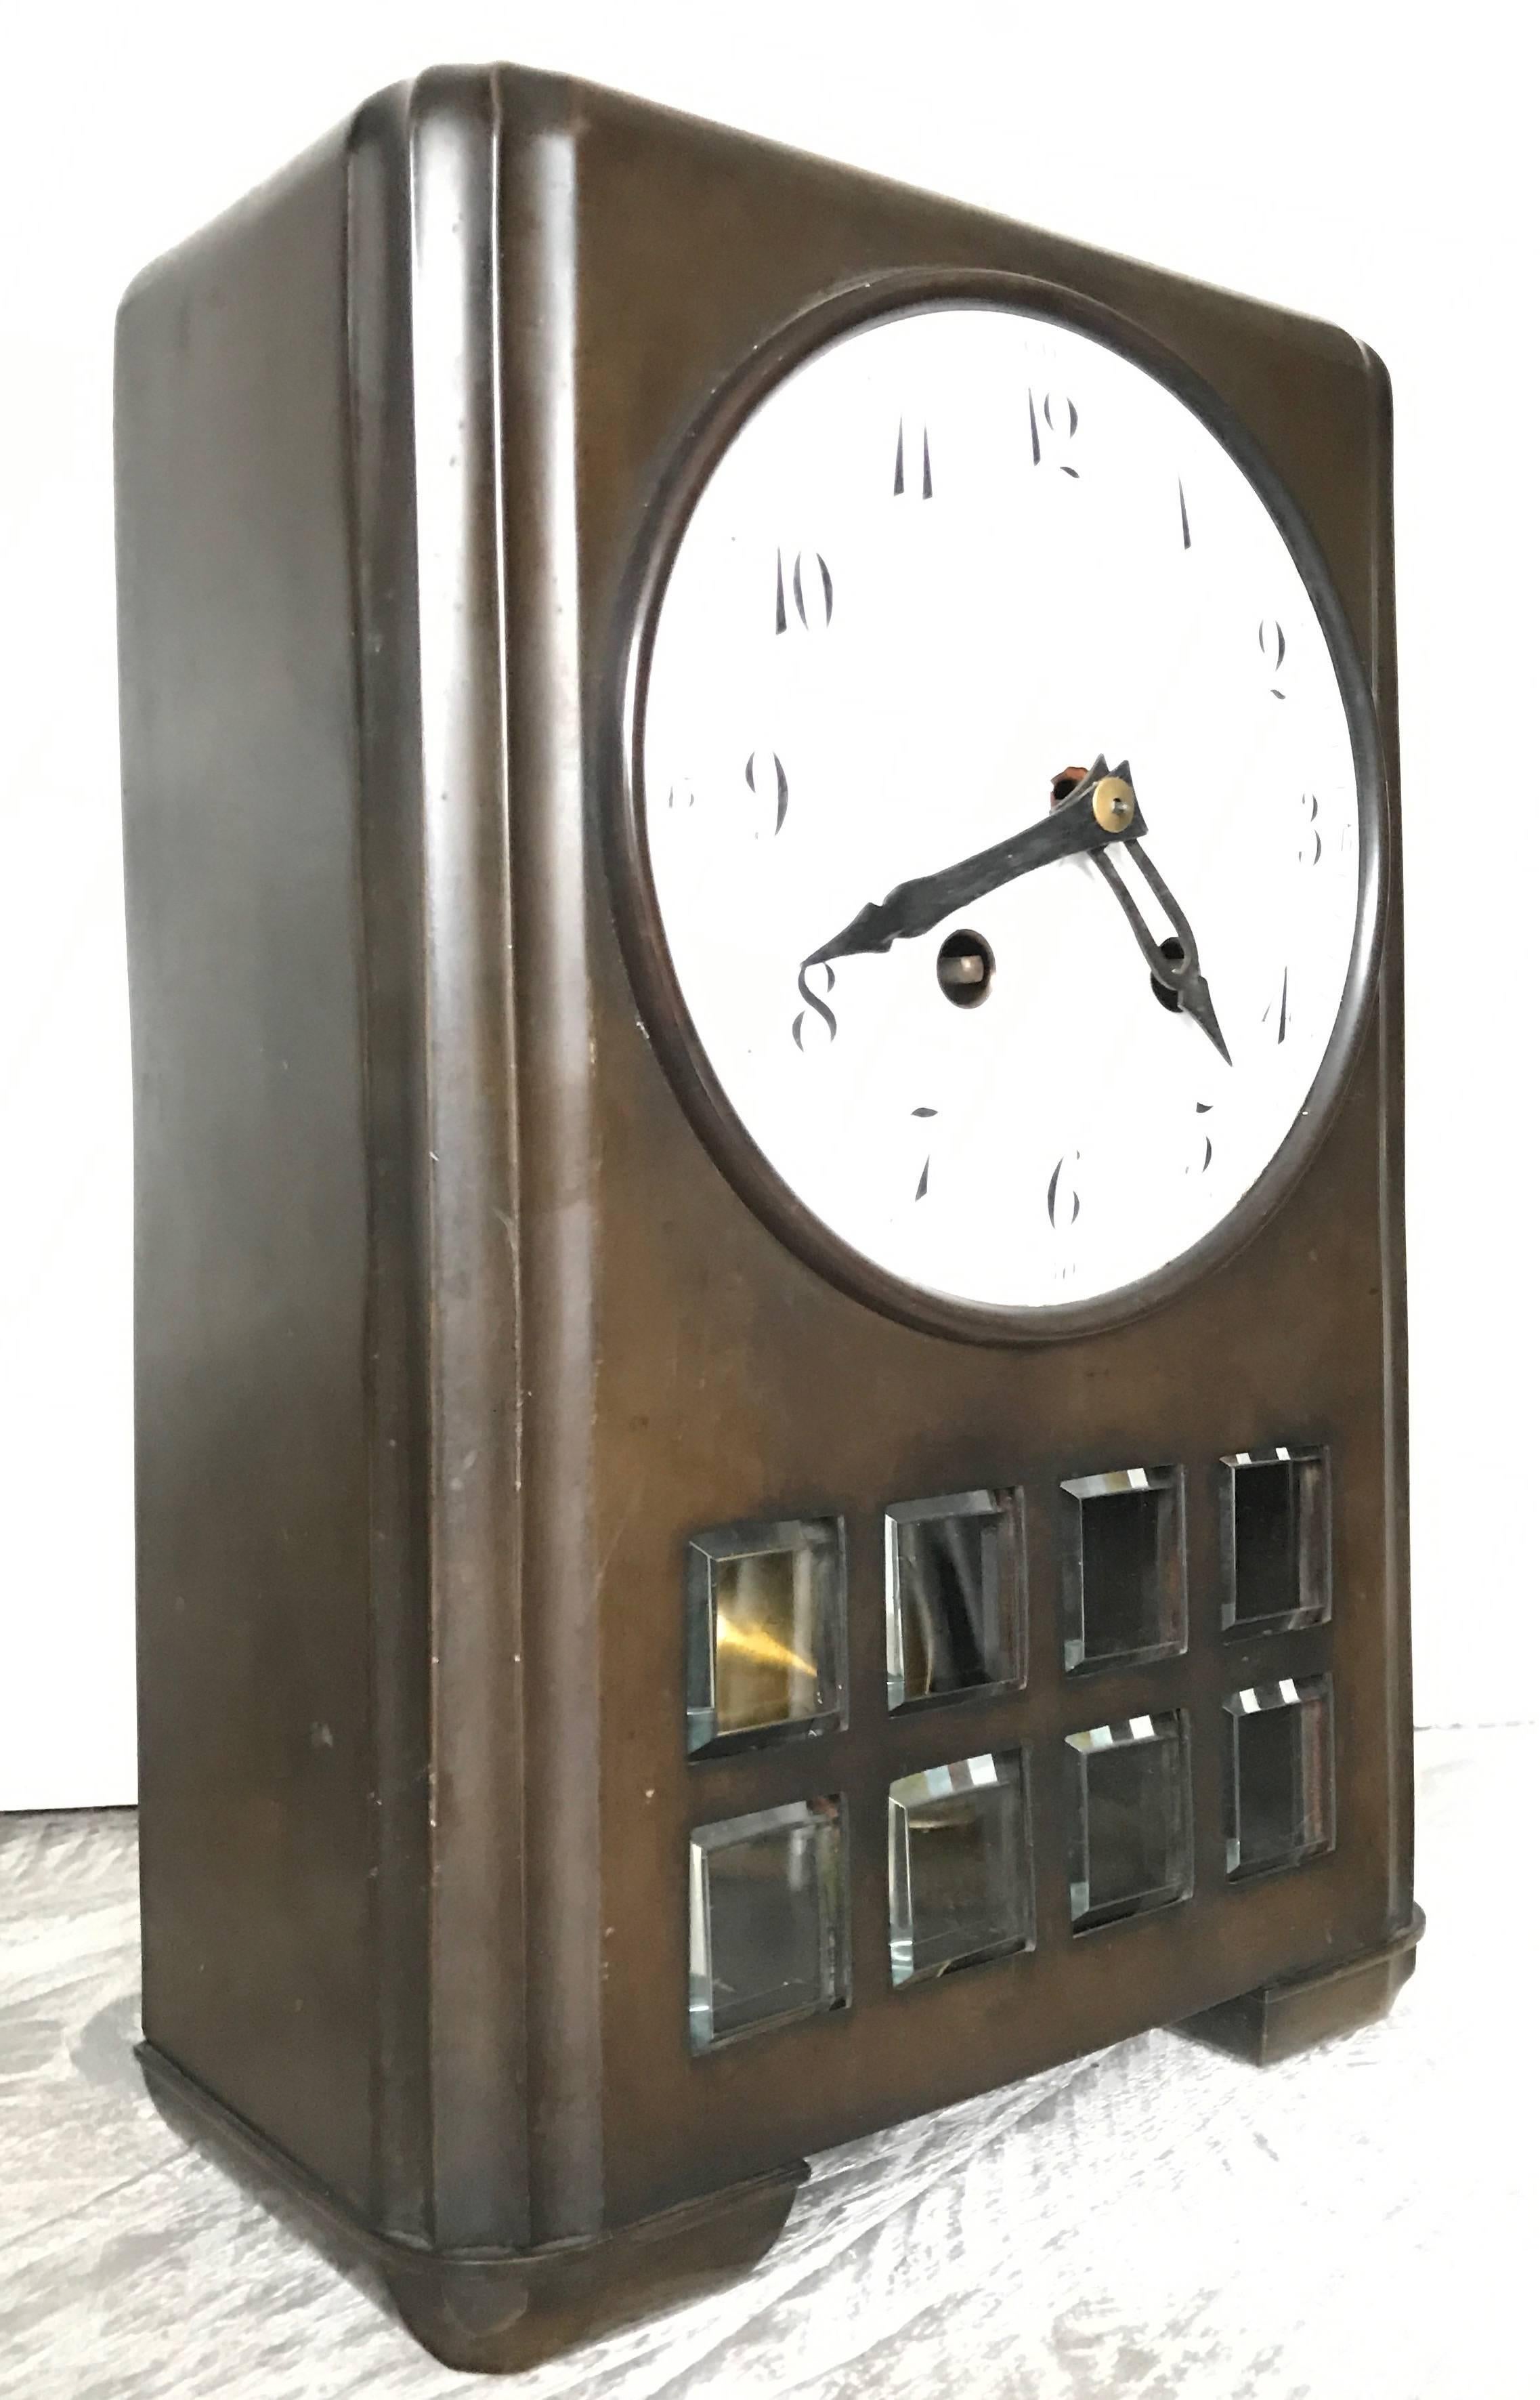 Bronze table clock from the transitional period between Art Nouveau and Art Deco.

This rare bronze table clock is by Lenzkirch and it dates from the transitional period of the Jugendstil into the Art Deco. This German cast bronze clock comes with